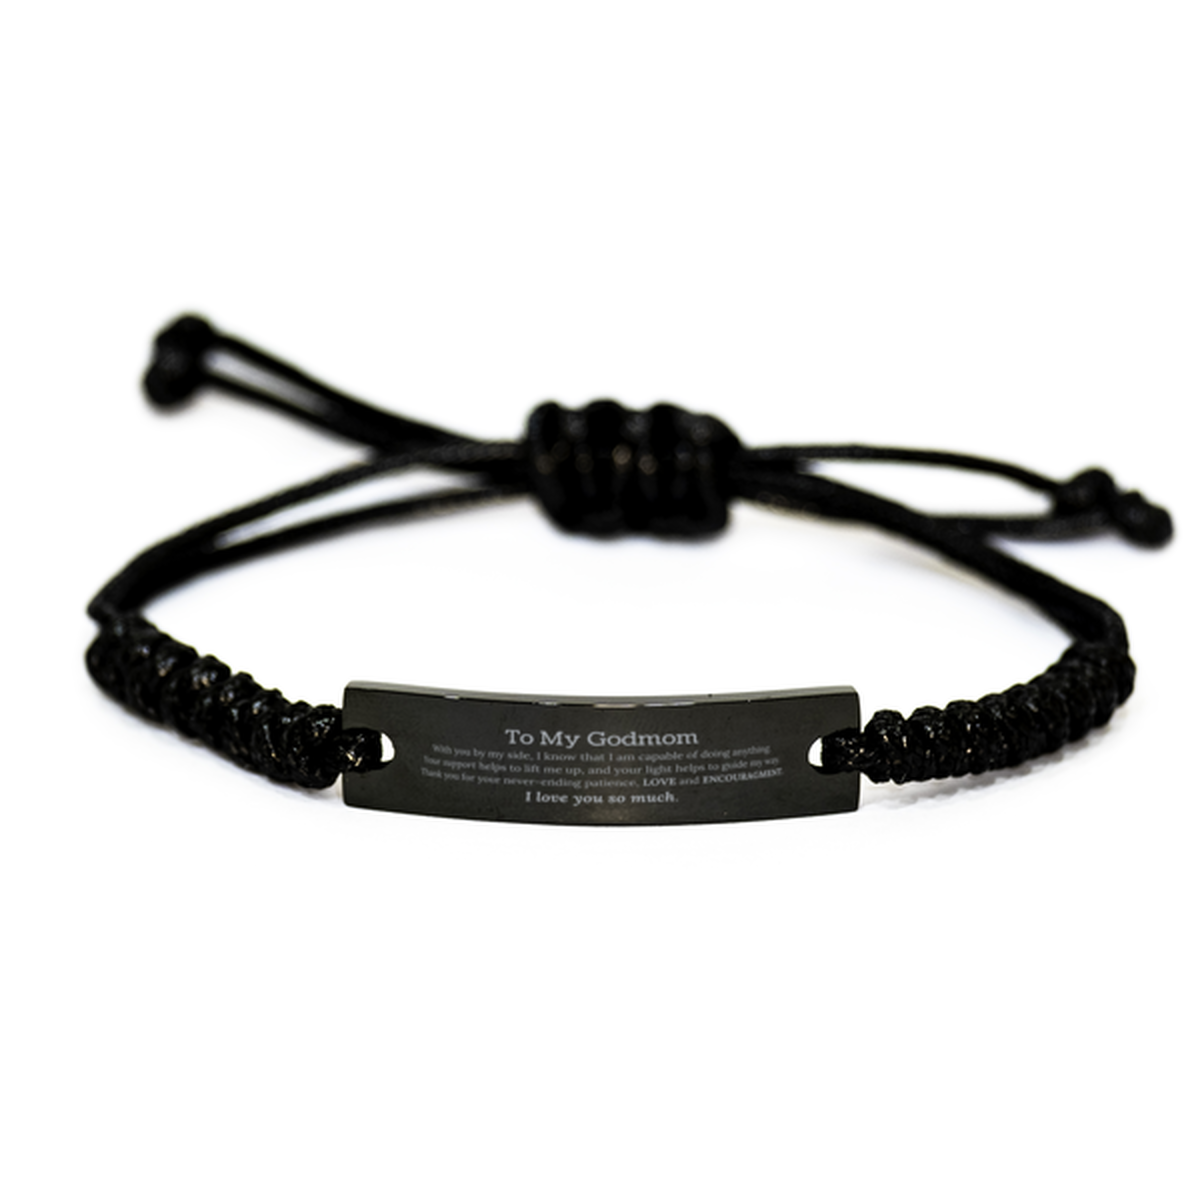 Appreciation Godmom Black Rope Bracelet Gifts, To My Godmom Birthday Christmas Wedding Keepsake Gifts for Godmom With you by my side, I know that I am capable of doing anything. I love you so much